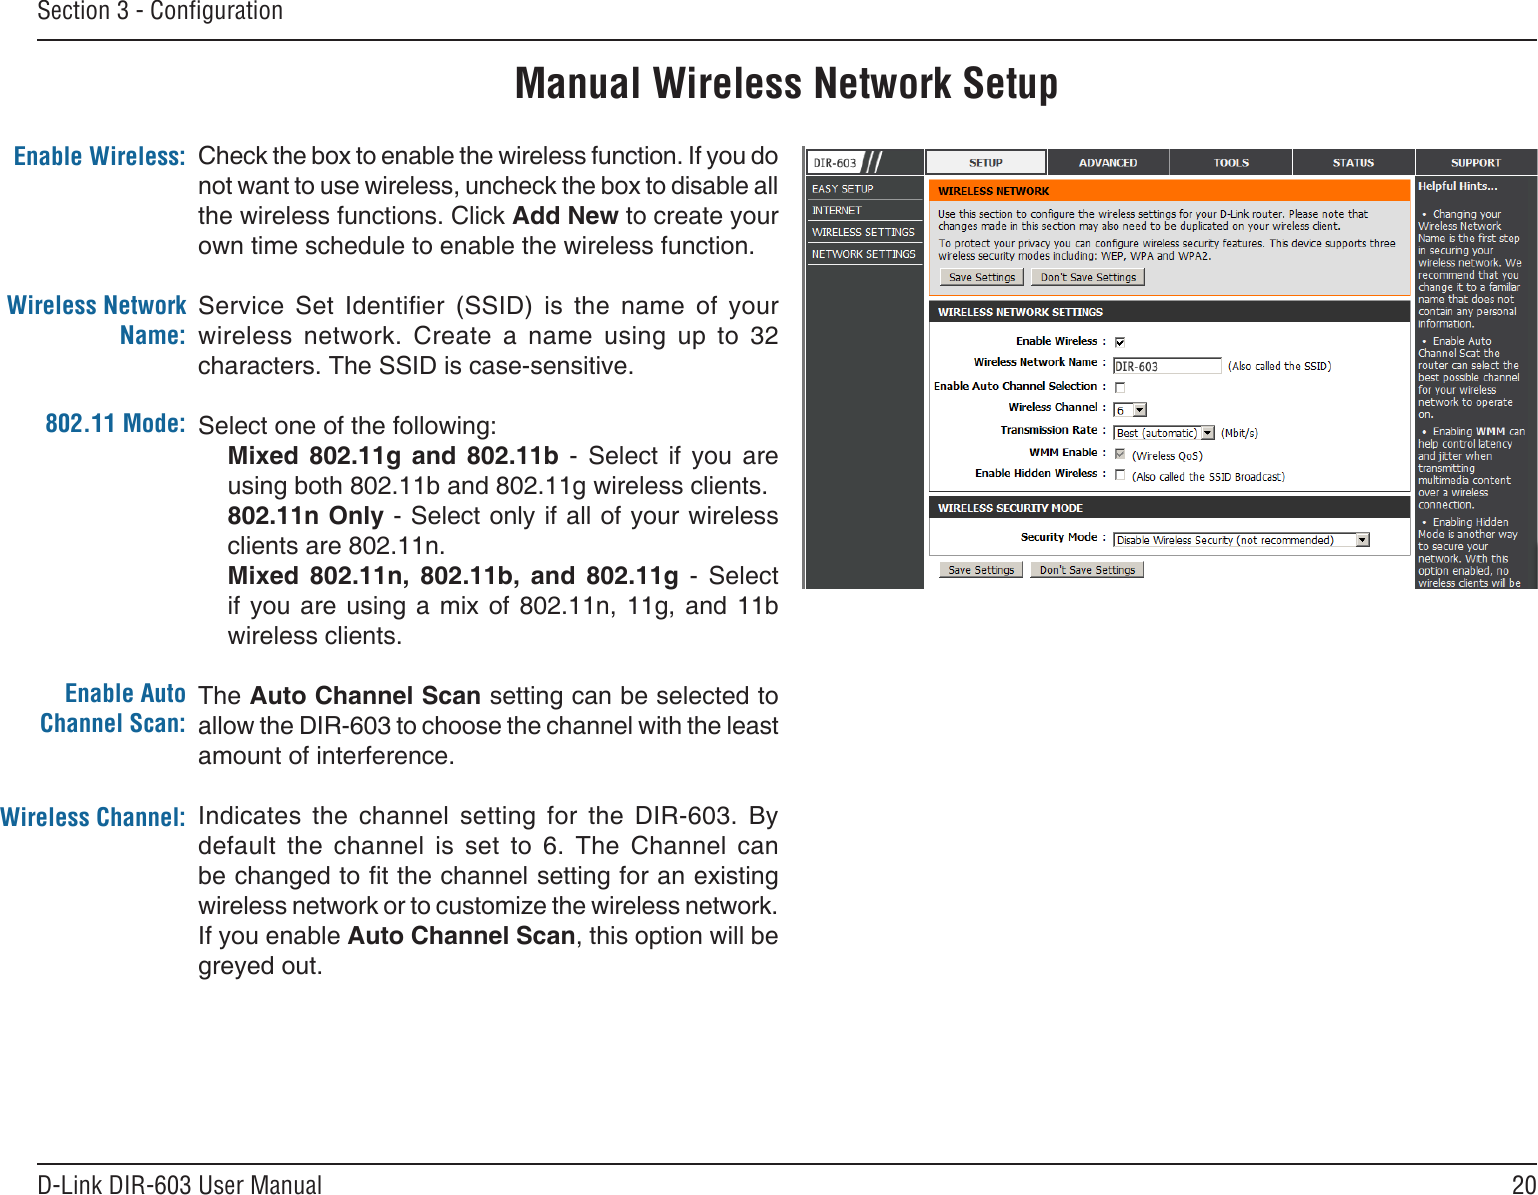 20D-Link DIR-603 User ManualSection 3 - CongurationManual Wireless Network SetupCheck the box to enable the wireless function. If you do not want to use wireless, uncheck the box to disable all the wireless functions. Click Add New to create your own time schedule to enable the wireless function. Service  Set  Identier  (SSID)  is  the  name  of  your wireless  network.  Create  a  name  using  up  to  32 characters. The SSID is case-sensitive.Select one of the following:Mixed  802.11g  and  802.11b  -  Select  if  you  are using both 802.11b and 802.11g wireless clients.802.11n Only - Select only if all of your wireless clients are 802.11n.Mixed  802.11n,  802.11b,  and  802.11g  -  Select if you  are  using  a  mix  of  802.11n,  11g,  and  11b wireless clients.The Auto Channel Scan setting can be selected to allow the DIR-603 to choose the channel with the least amount of interference.Indicates  the  channel  setting  for  the  DIR-603.  By default  the  channel  is  set  to  6.  The  Channel  can be changed to t the channel setting for an existing wireless network or to customize the wireless network. If you enable Auto Channel Scan, this option will be greyed out.Enable Wireless:Wireless Network Name:802.11 Mode:Enable Auto Channel Scan:Wireless Channel: